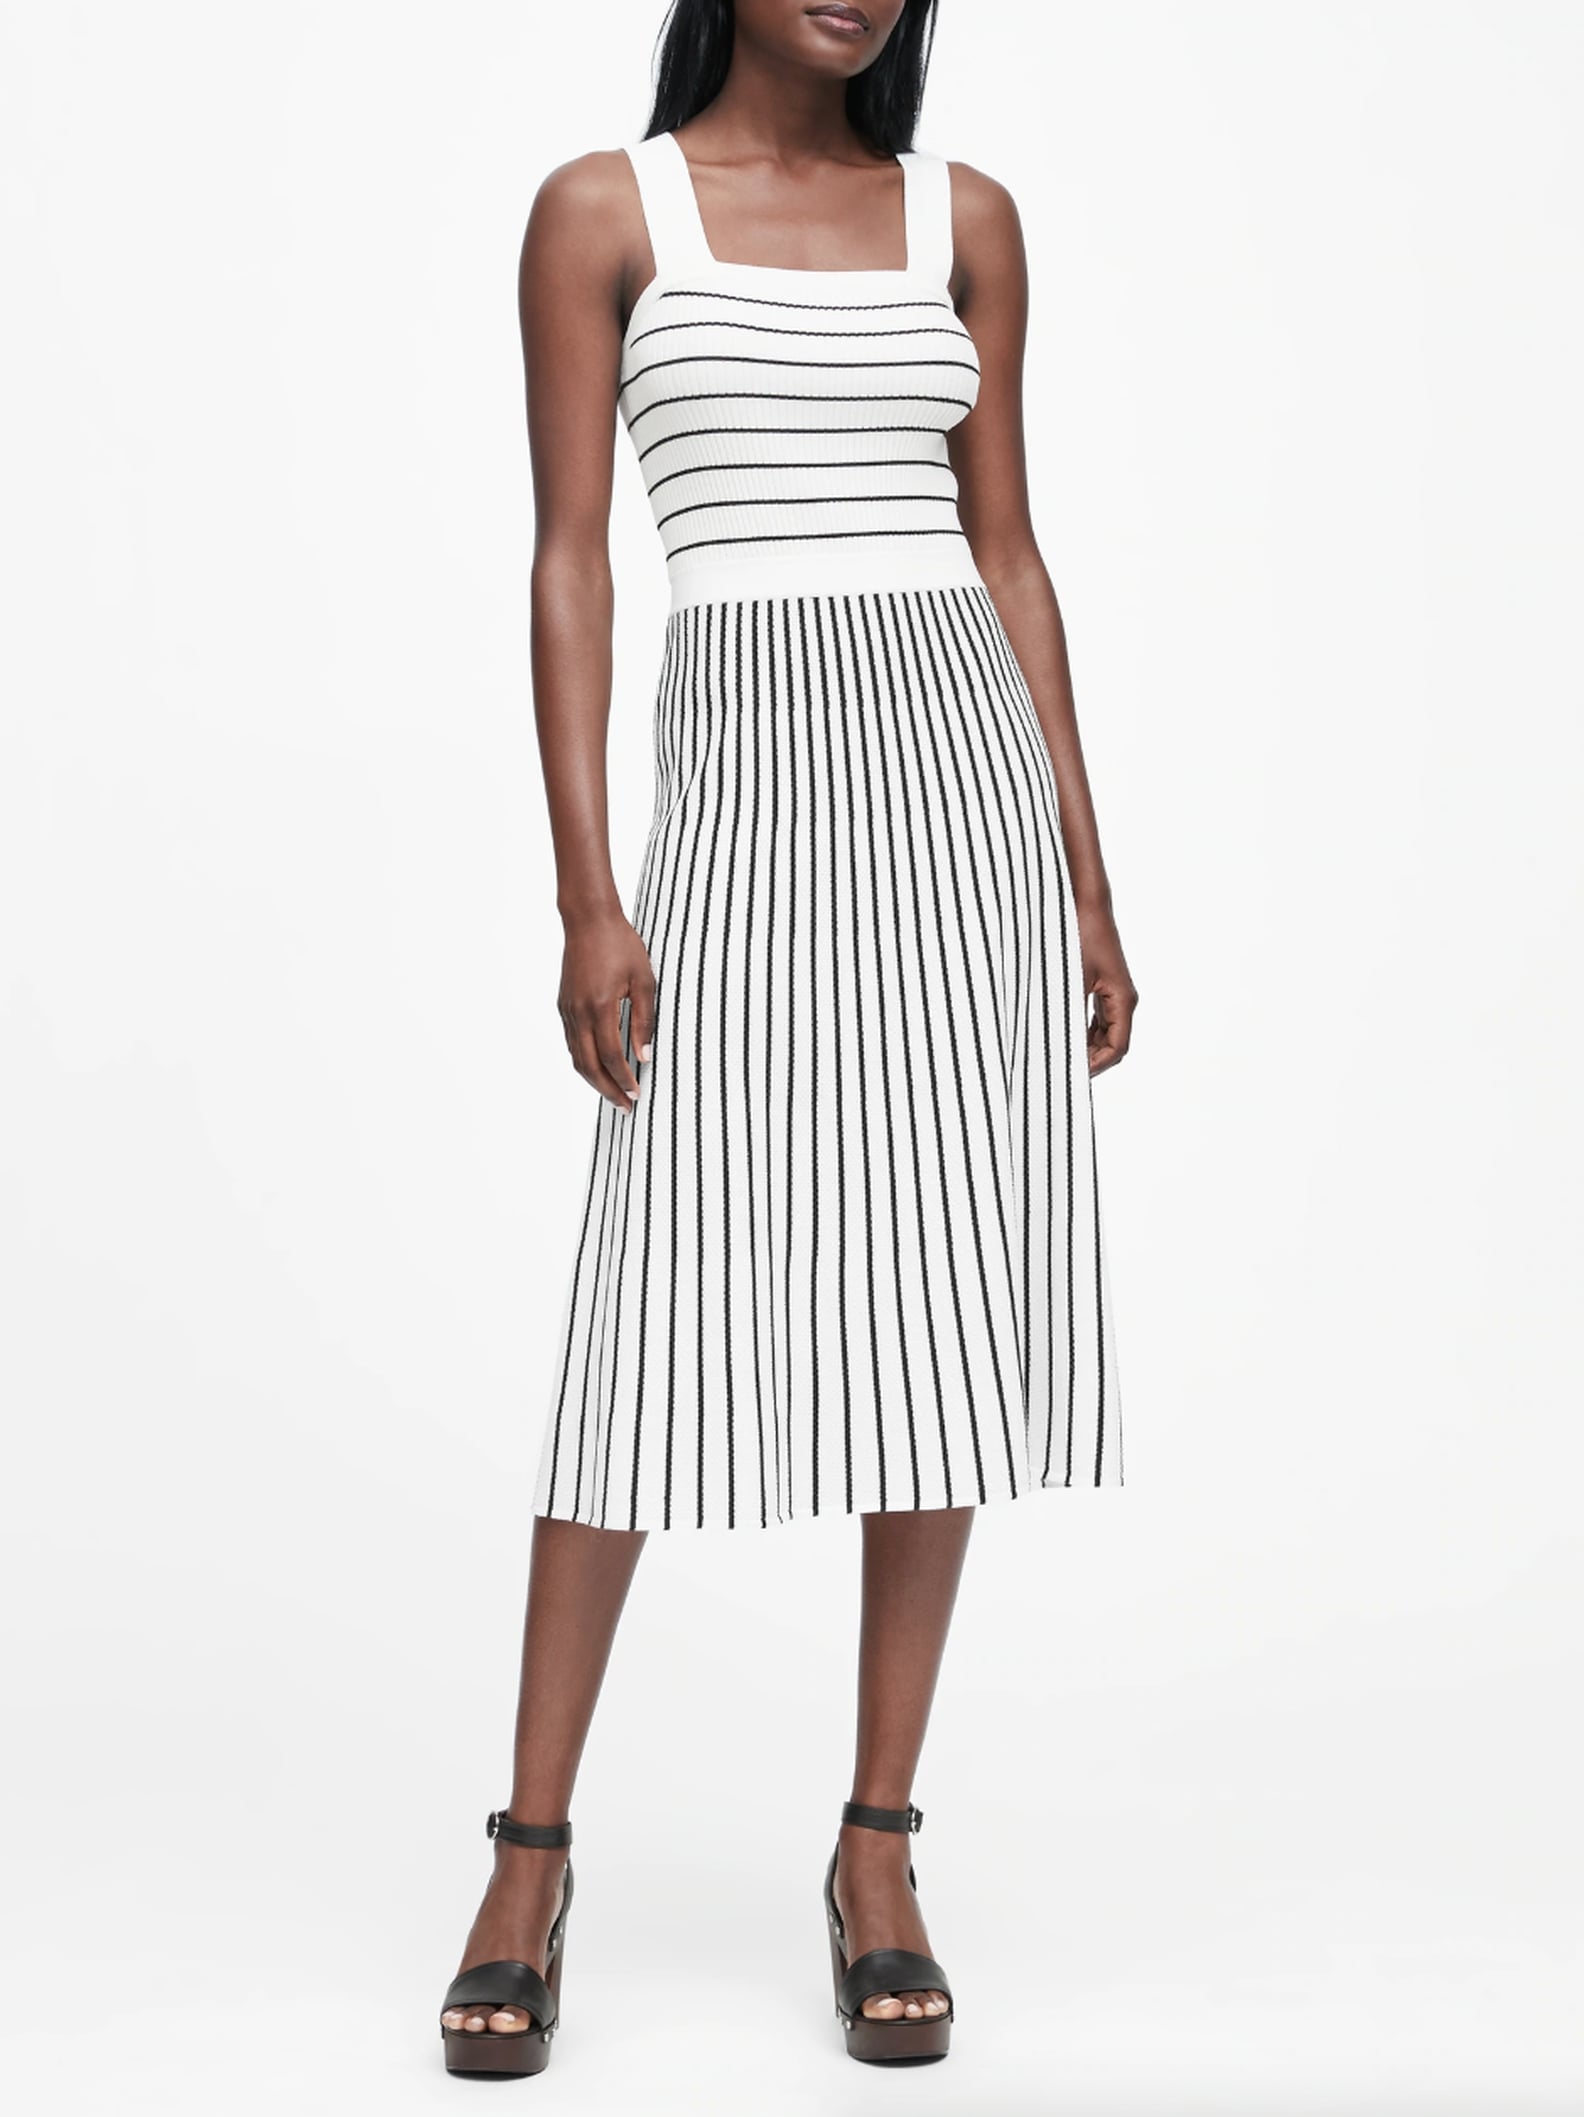 Summer Work Outfits From Banana Republic | POPSUGAR Fashion